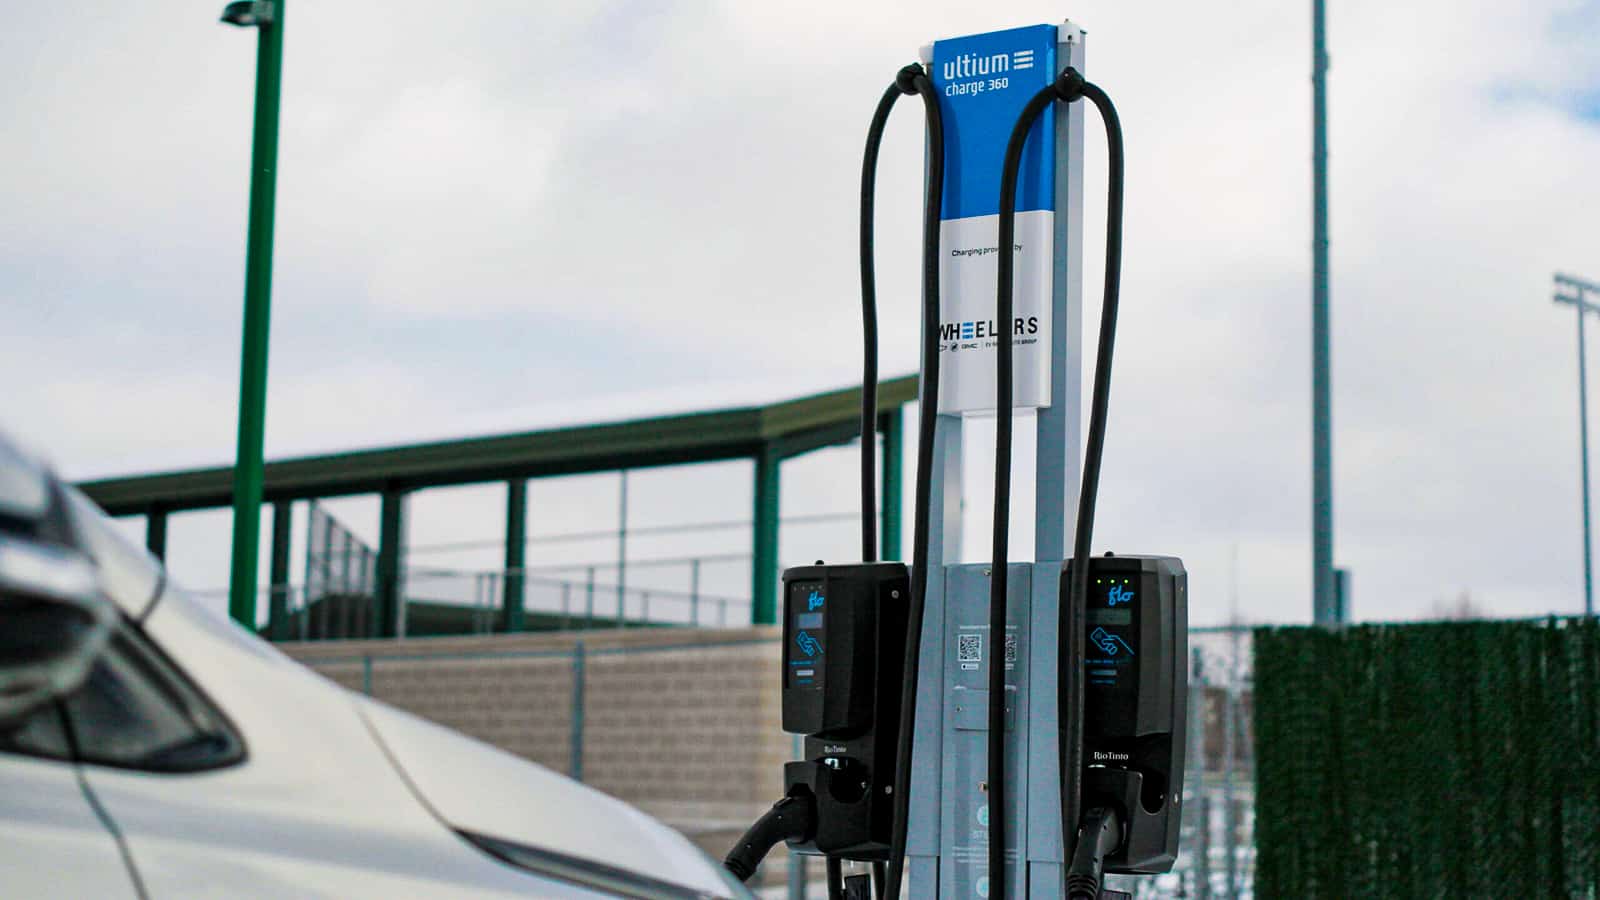 GM Global Technical Center Powers Up with Largest Deployment of FLO Charging Stations